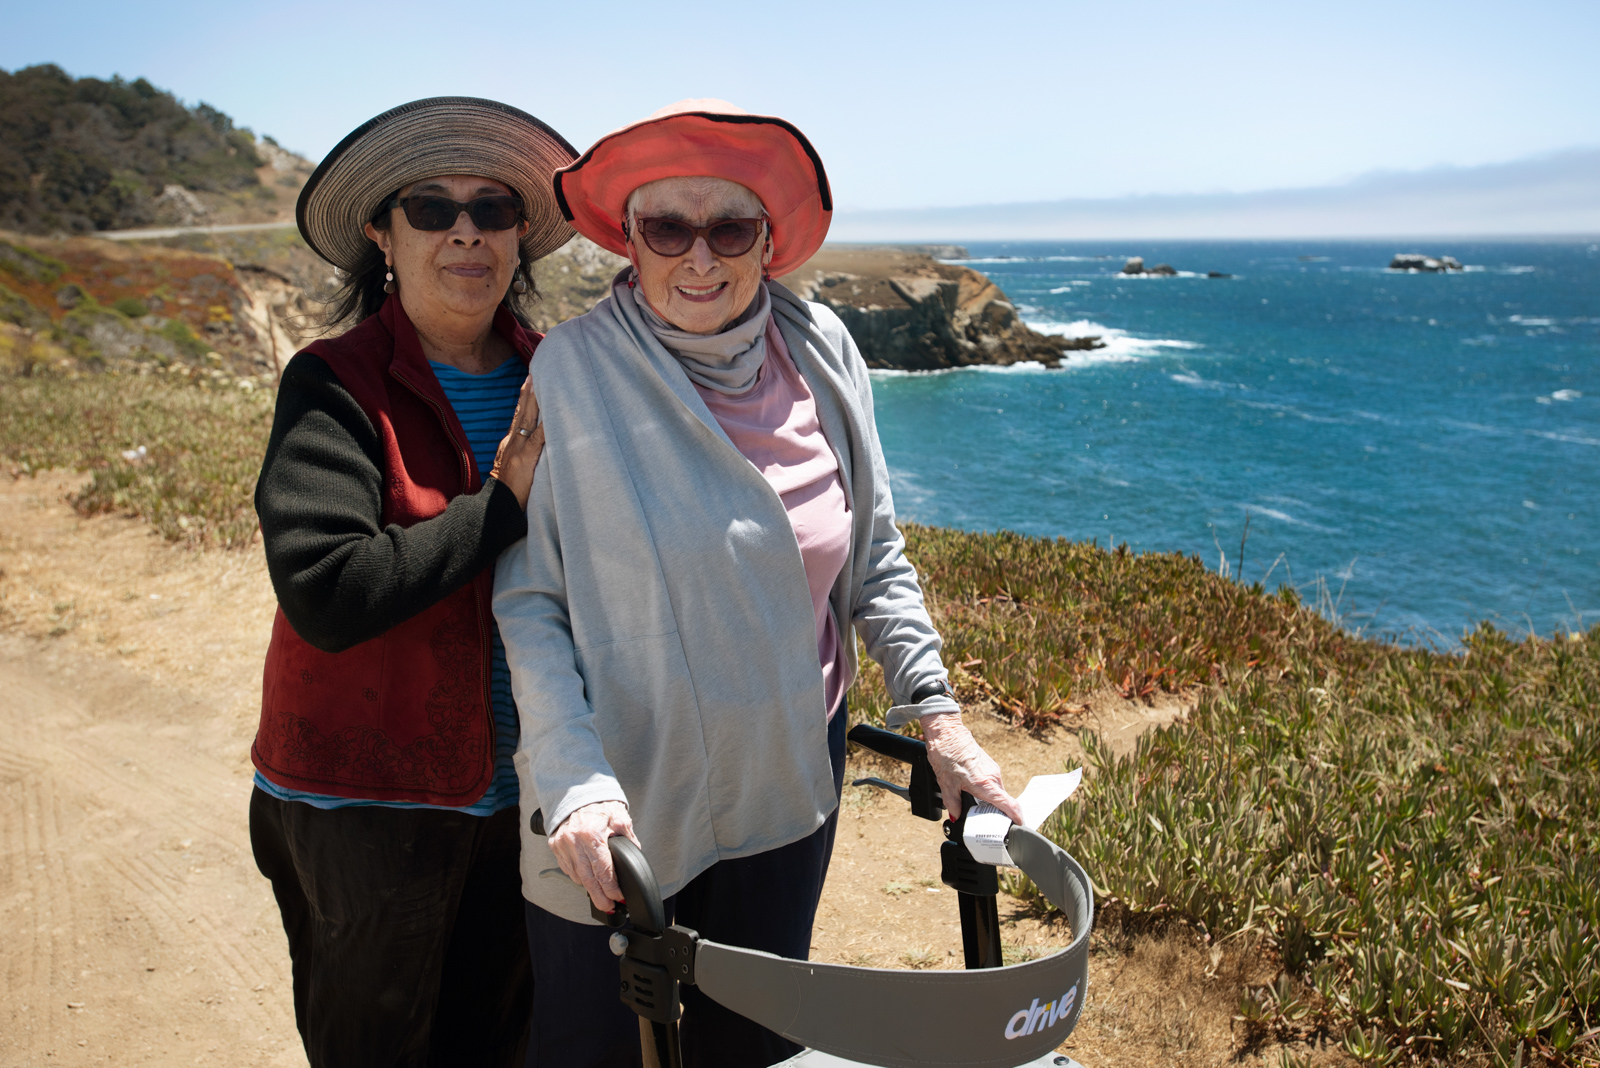 The blue ocean waves are seen behind two older ladies as they smile for a photo.